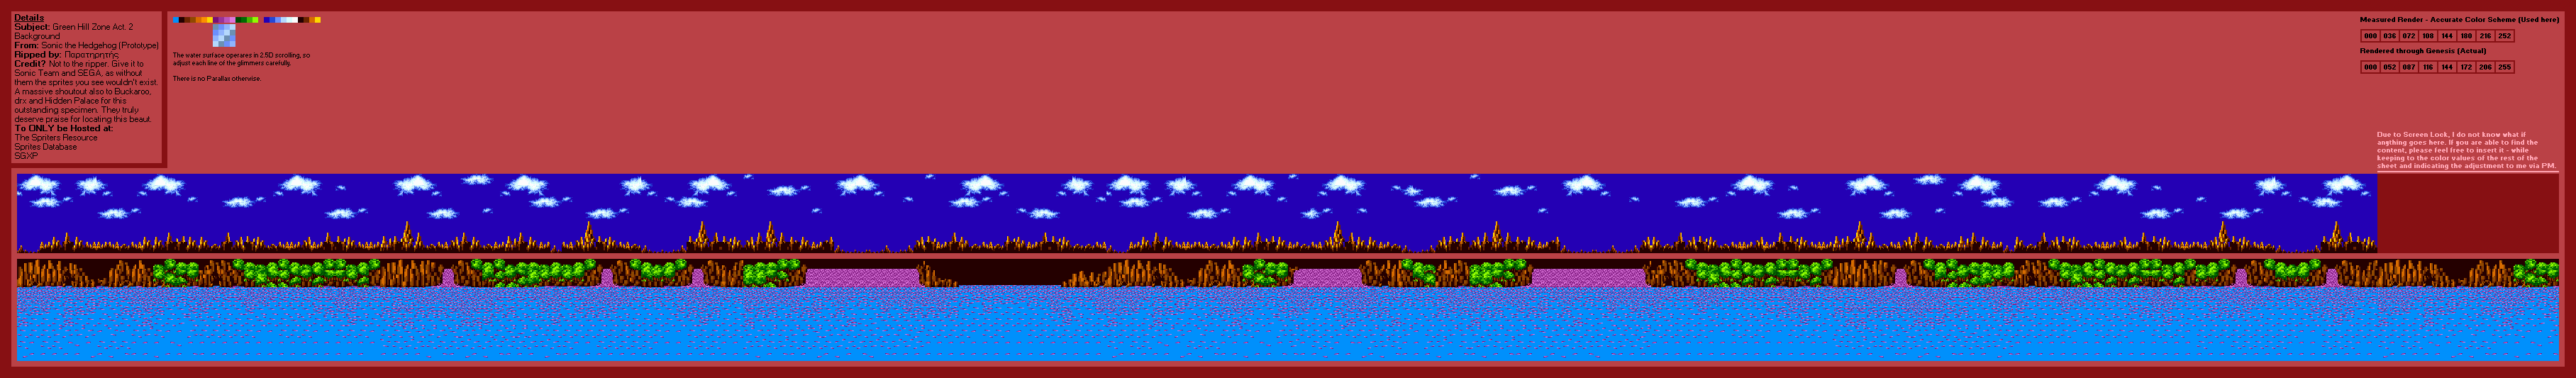 Green Hill Zone Act. 2 (Normal)